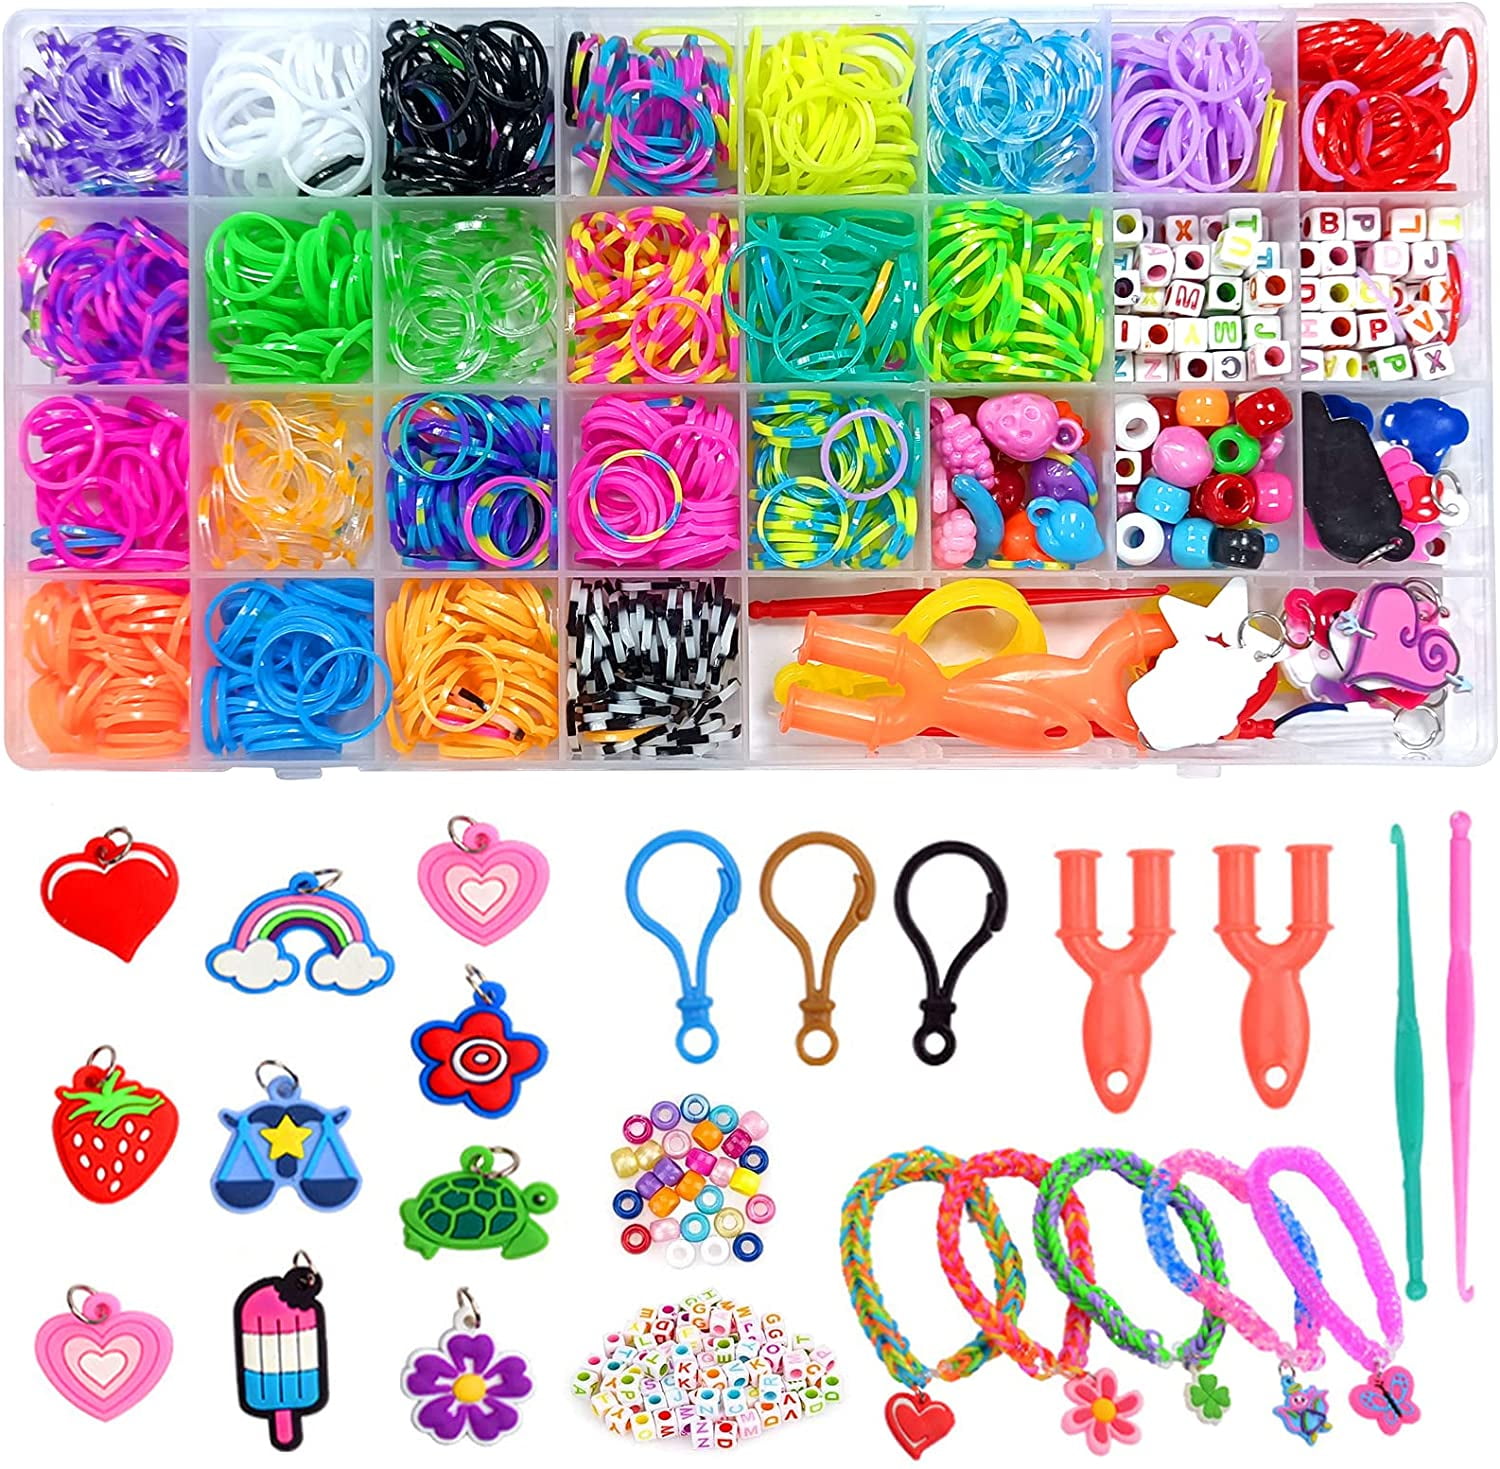 Friendship Colourful Loom Rubber Bands Set Making Gift For Kids Party Bag 